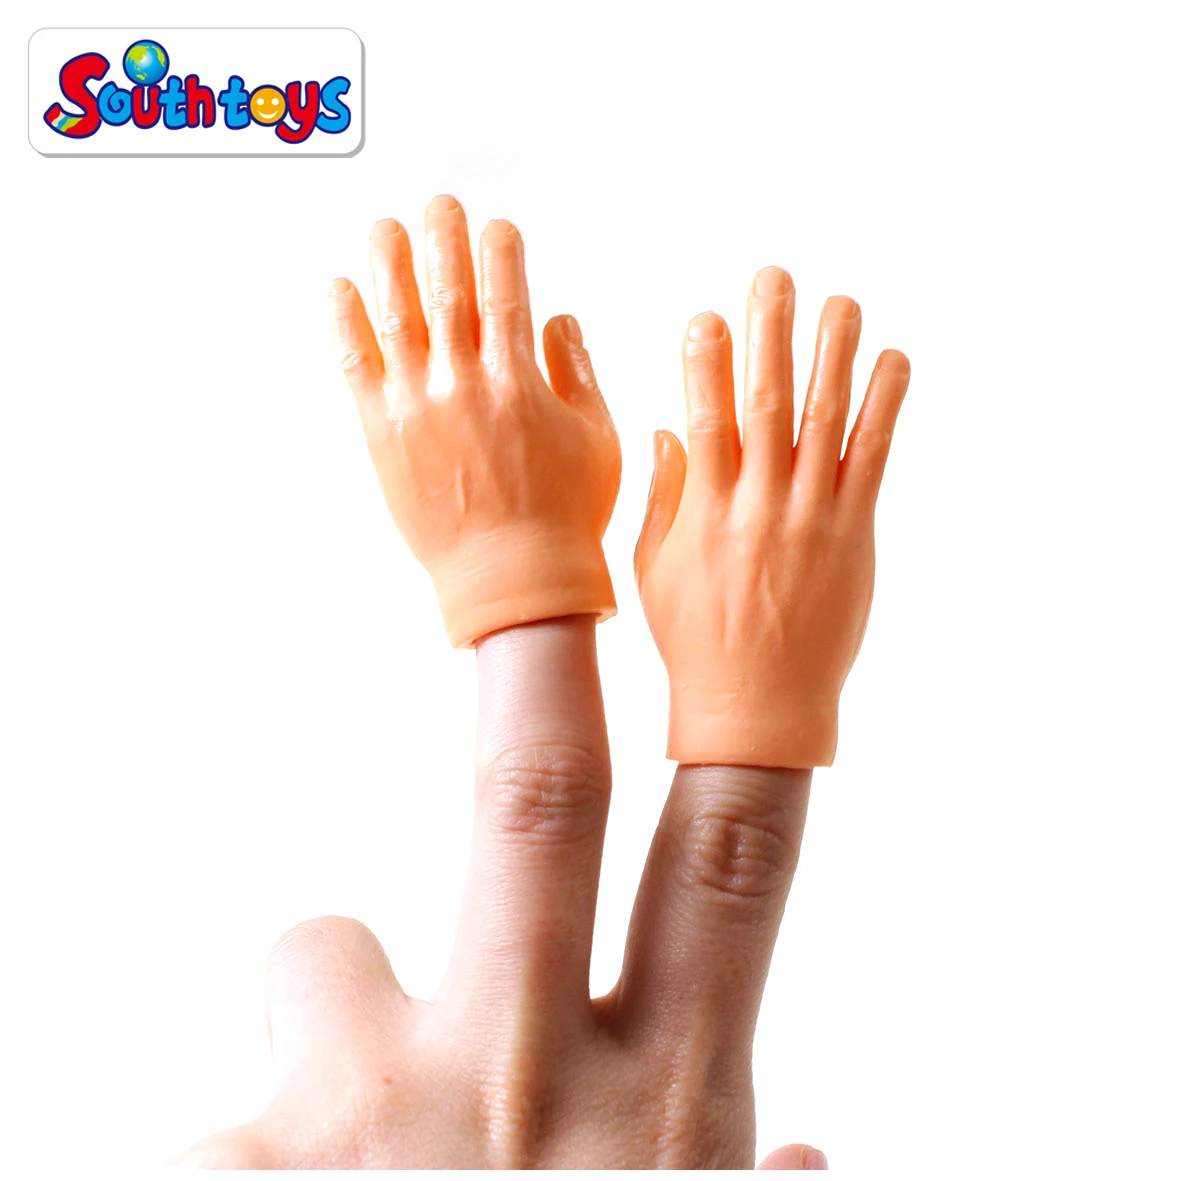 
Set of 10pcs Left or Right Tiny Hands Toy Finger Hands Finger Puppets 